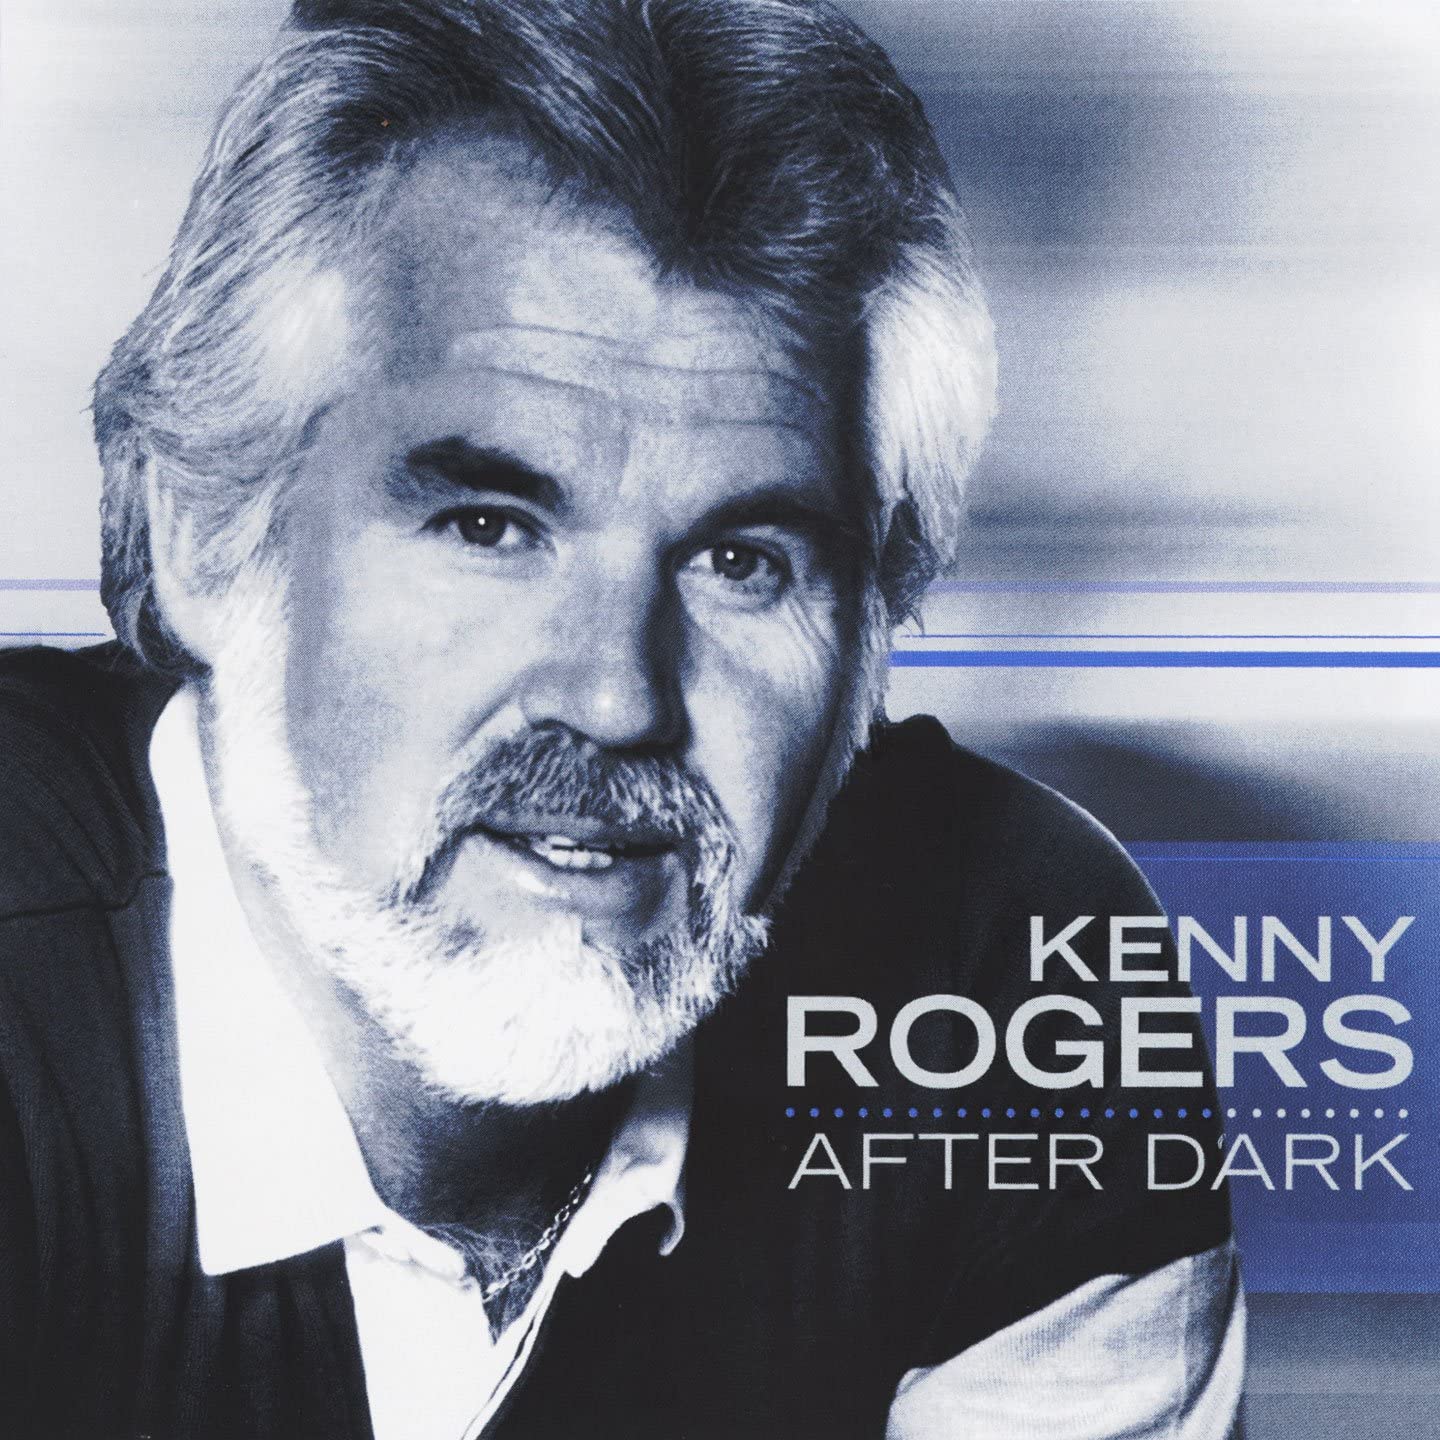 Kenny Rogers After Dark [Audio CD] Kenny Rogers